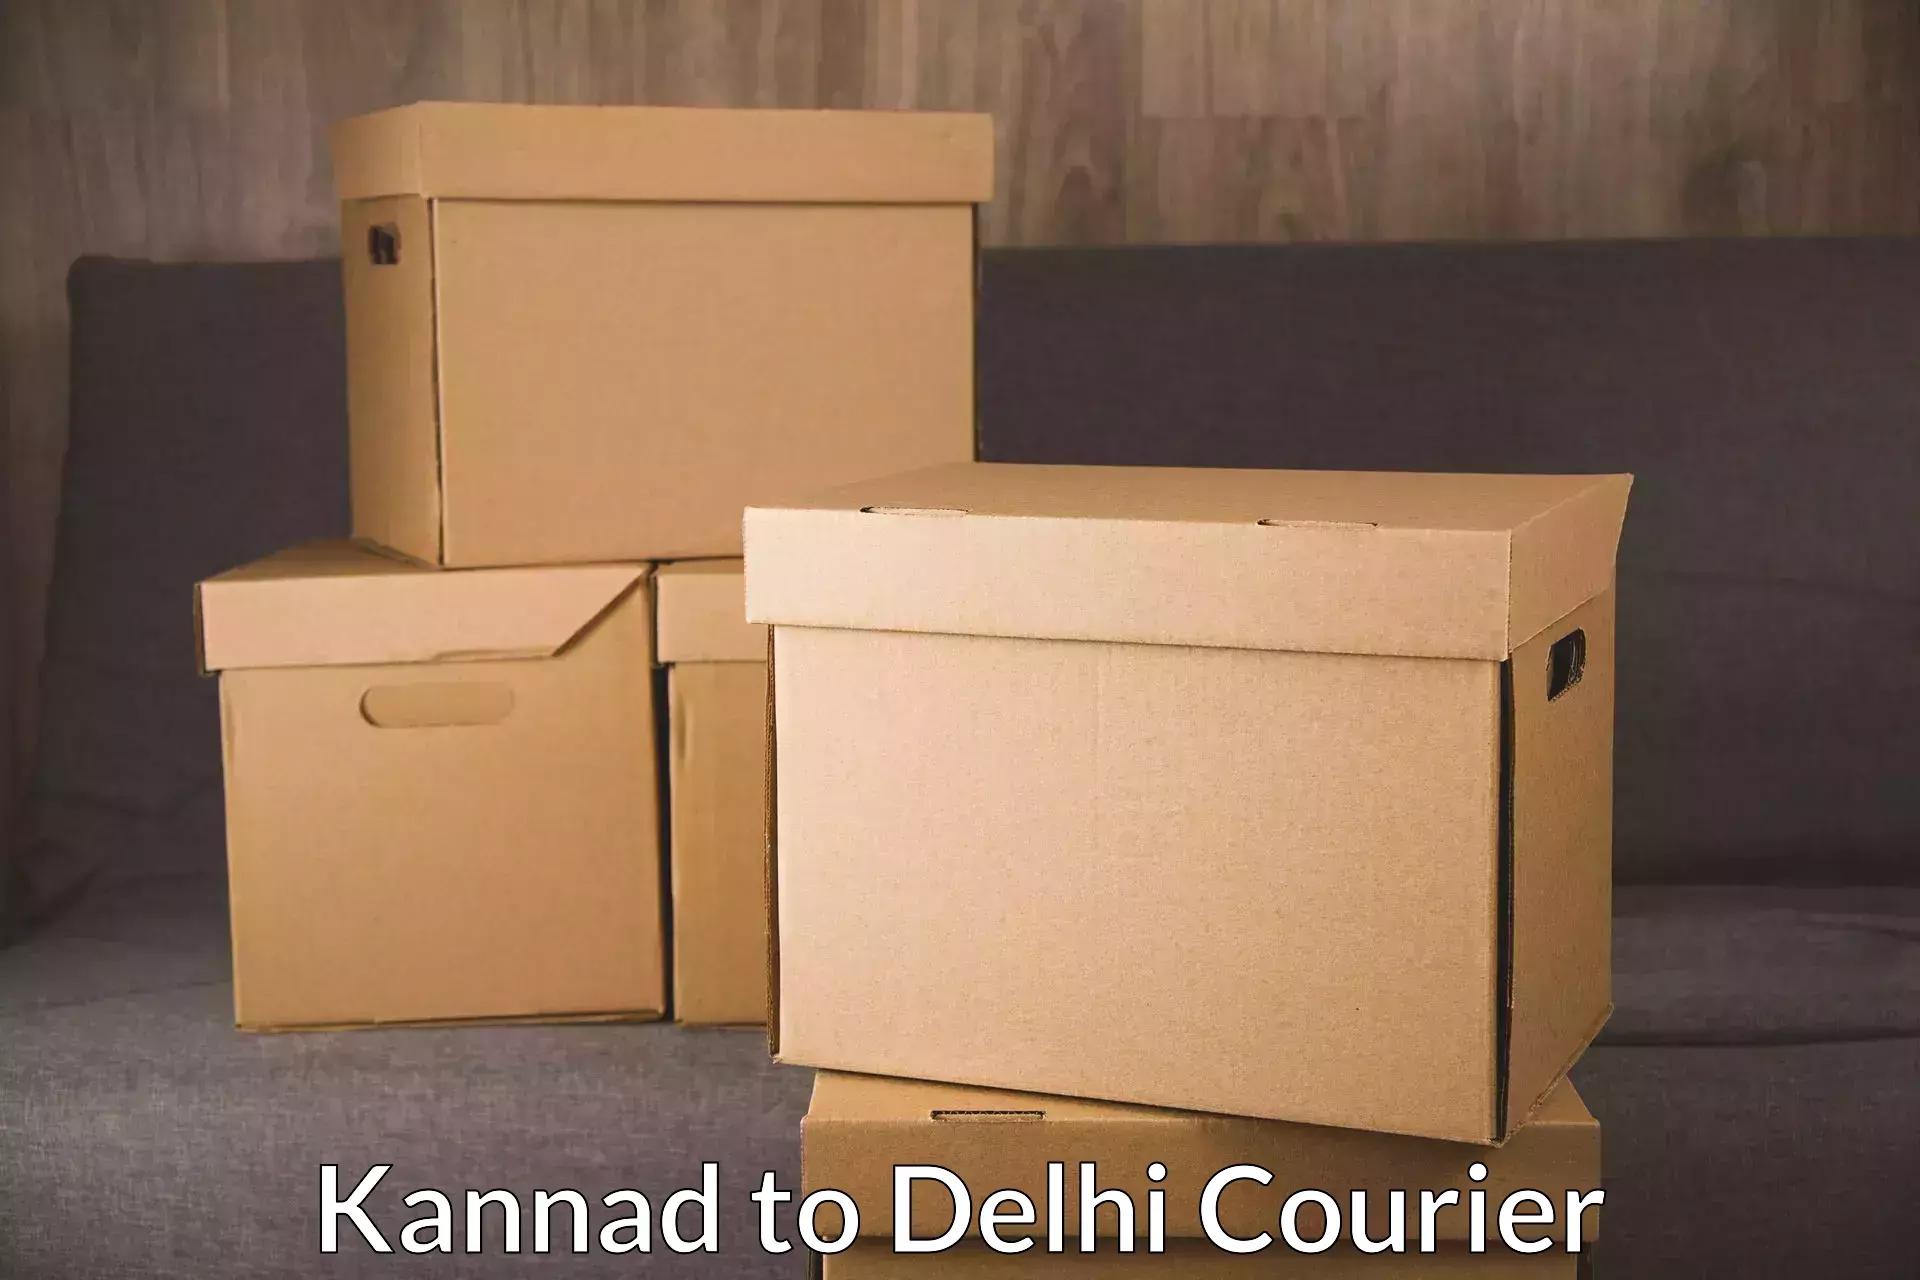 Express package transport in Kannad to Delhi